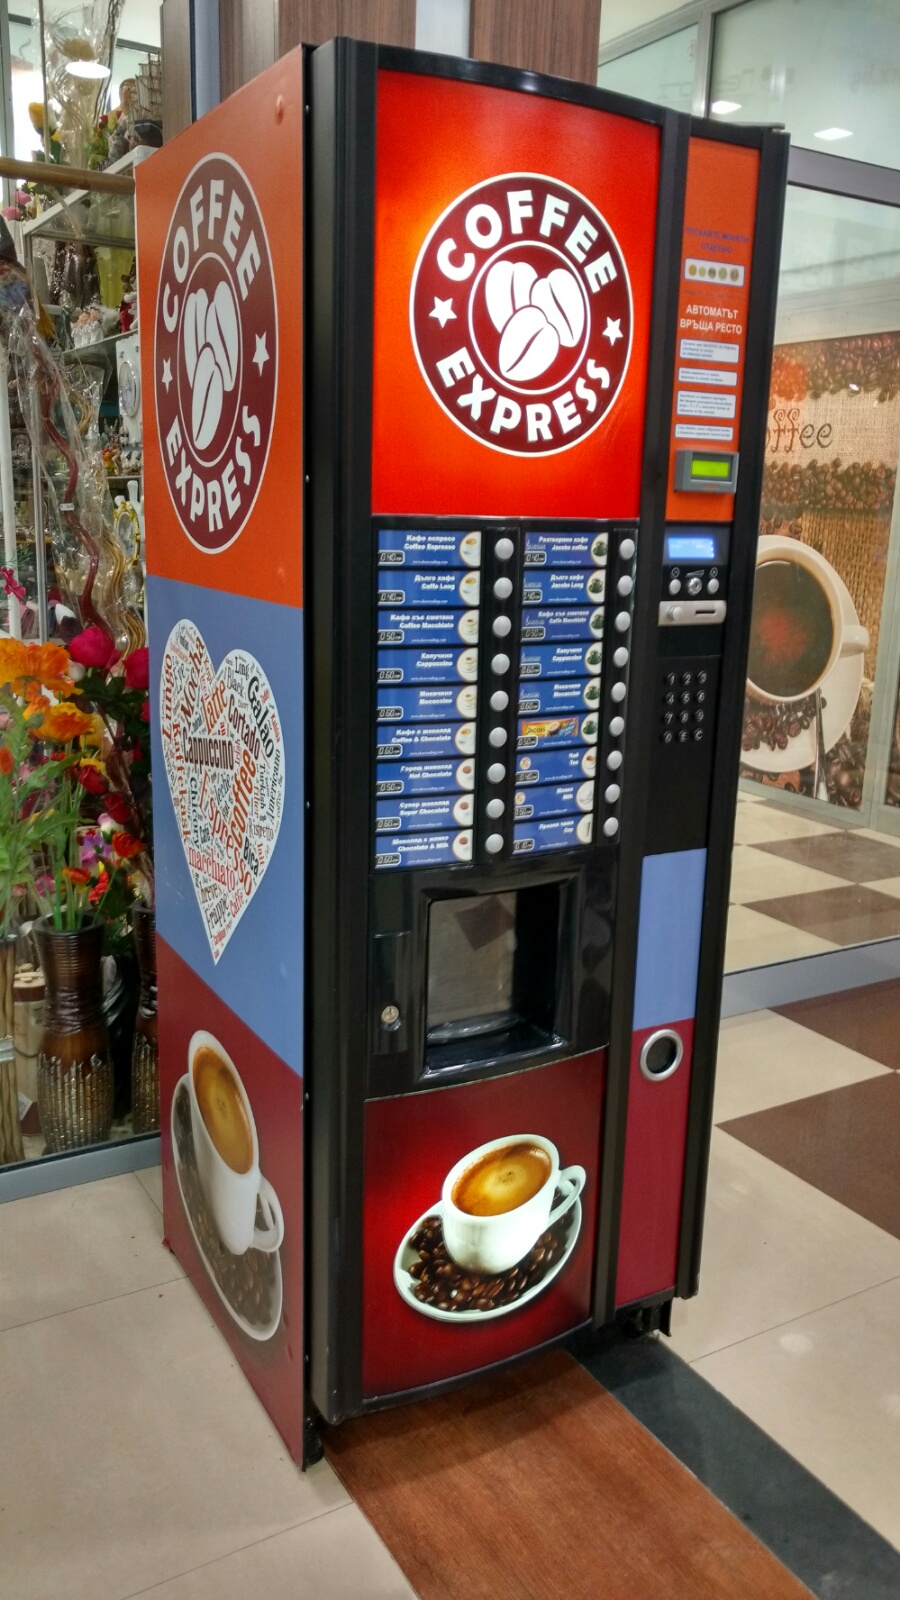 Saw this, did that.: Coffee vending machines